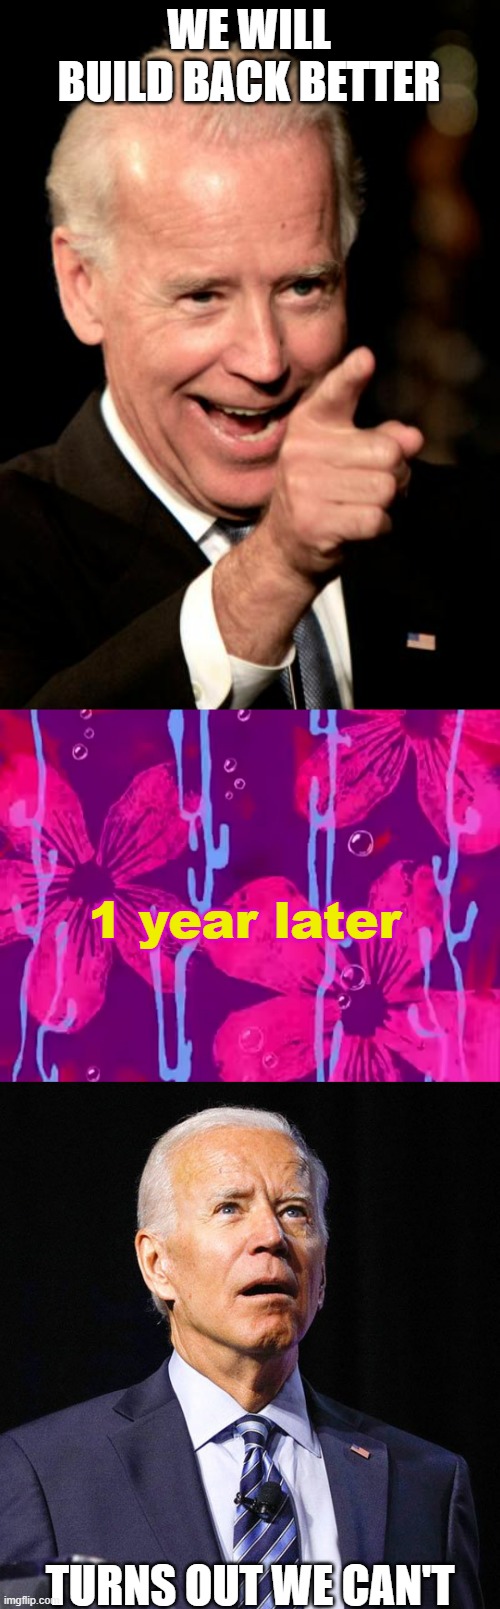 Never take a word of a politician for granted | WE WILL BUILD BACK BETTER; 1 year later; TURNS OUT WE CAN'T | image tagged in memes,smilin biden,spongebob title card,joe biden | made w/ Imgflip meme maker